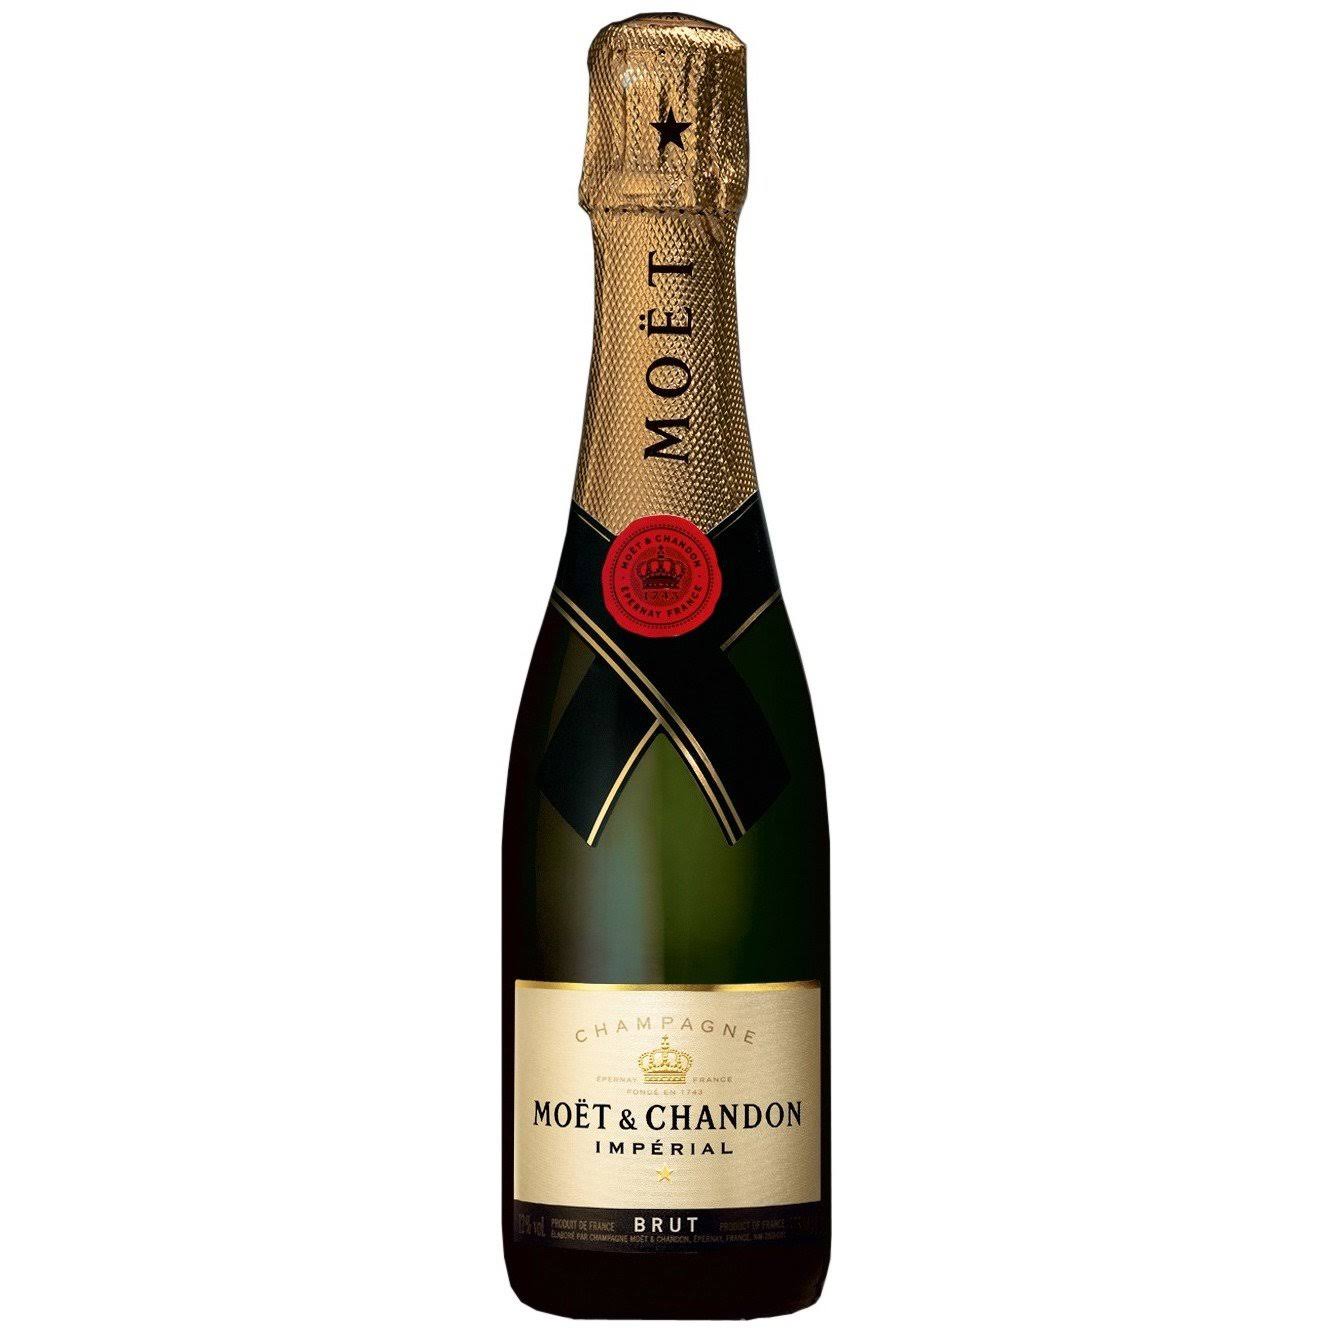 Moet and Chandon Nv Imperial Champagne - 375ml